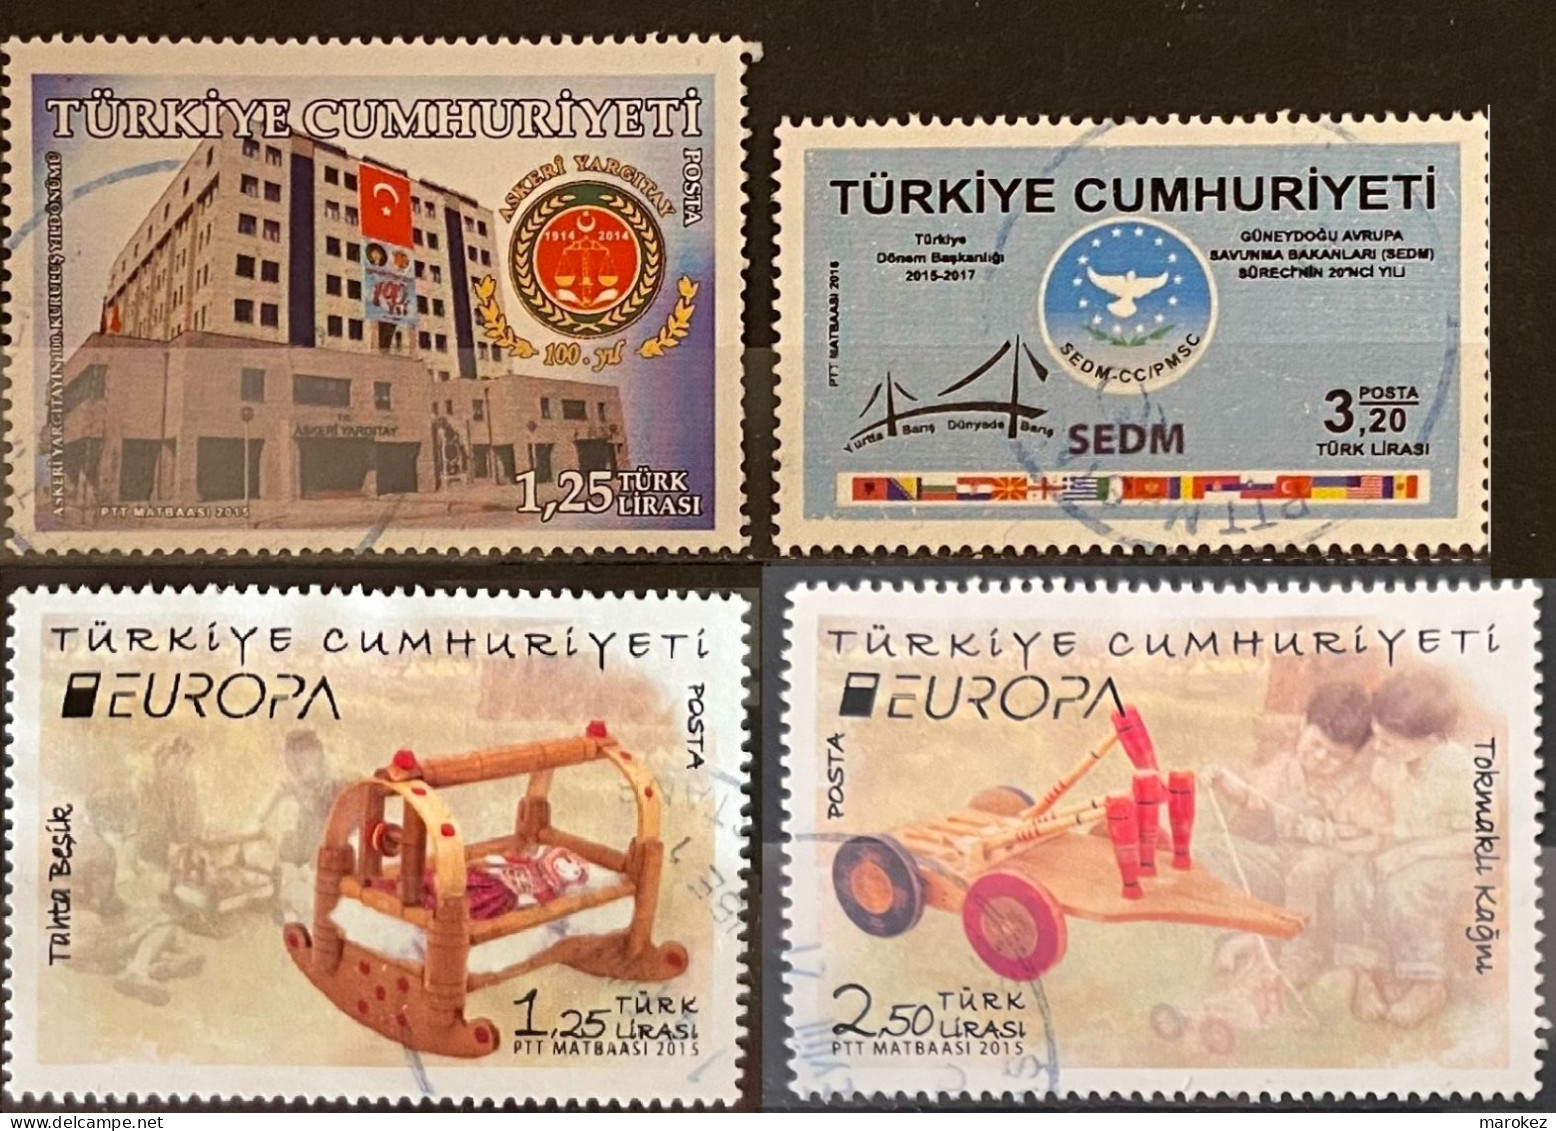 TURKEY 2015-2016 Institutions, Europa & Associations 4 Postally Used Stamps MICHEL # 4166,4176,4177,4307 - Usati